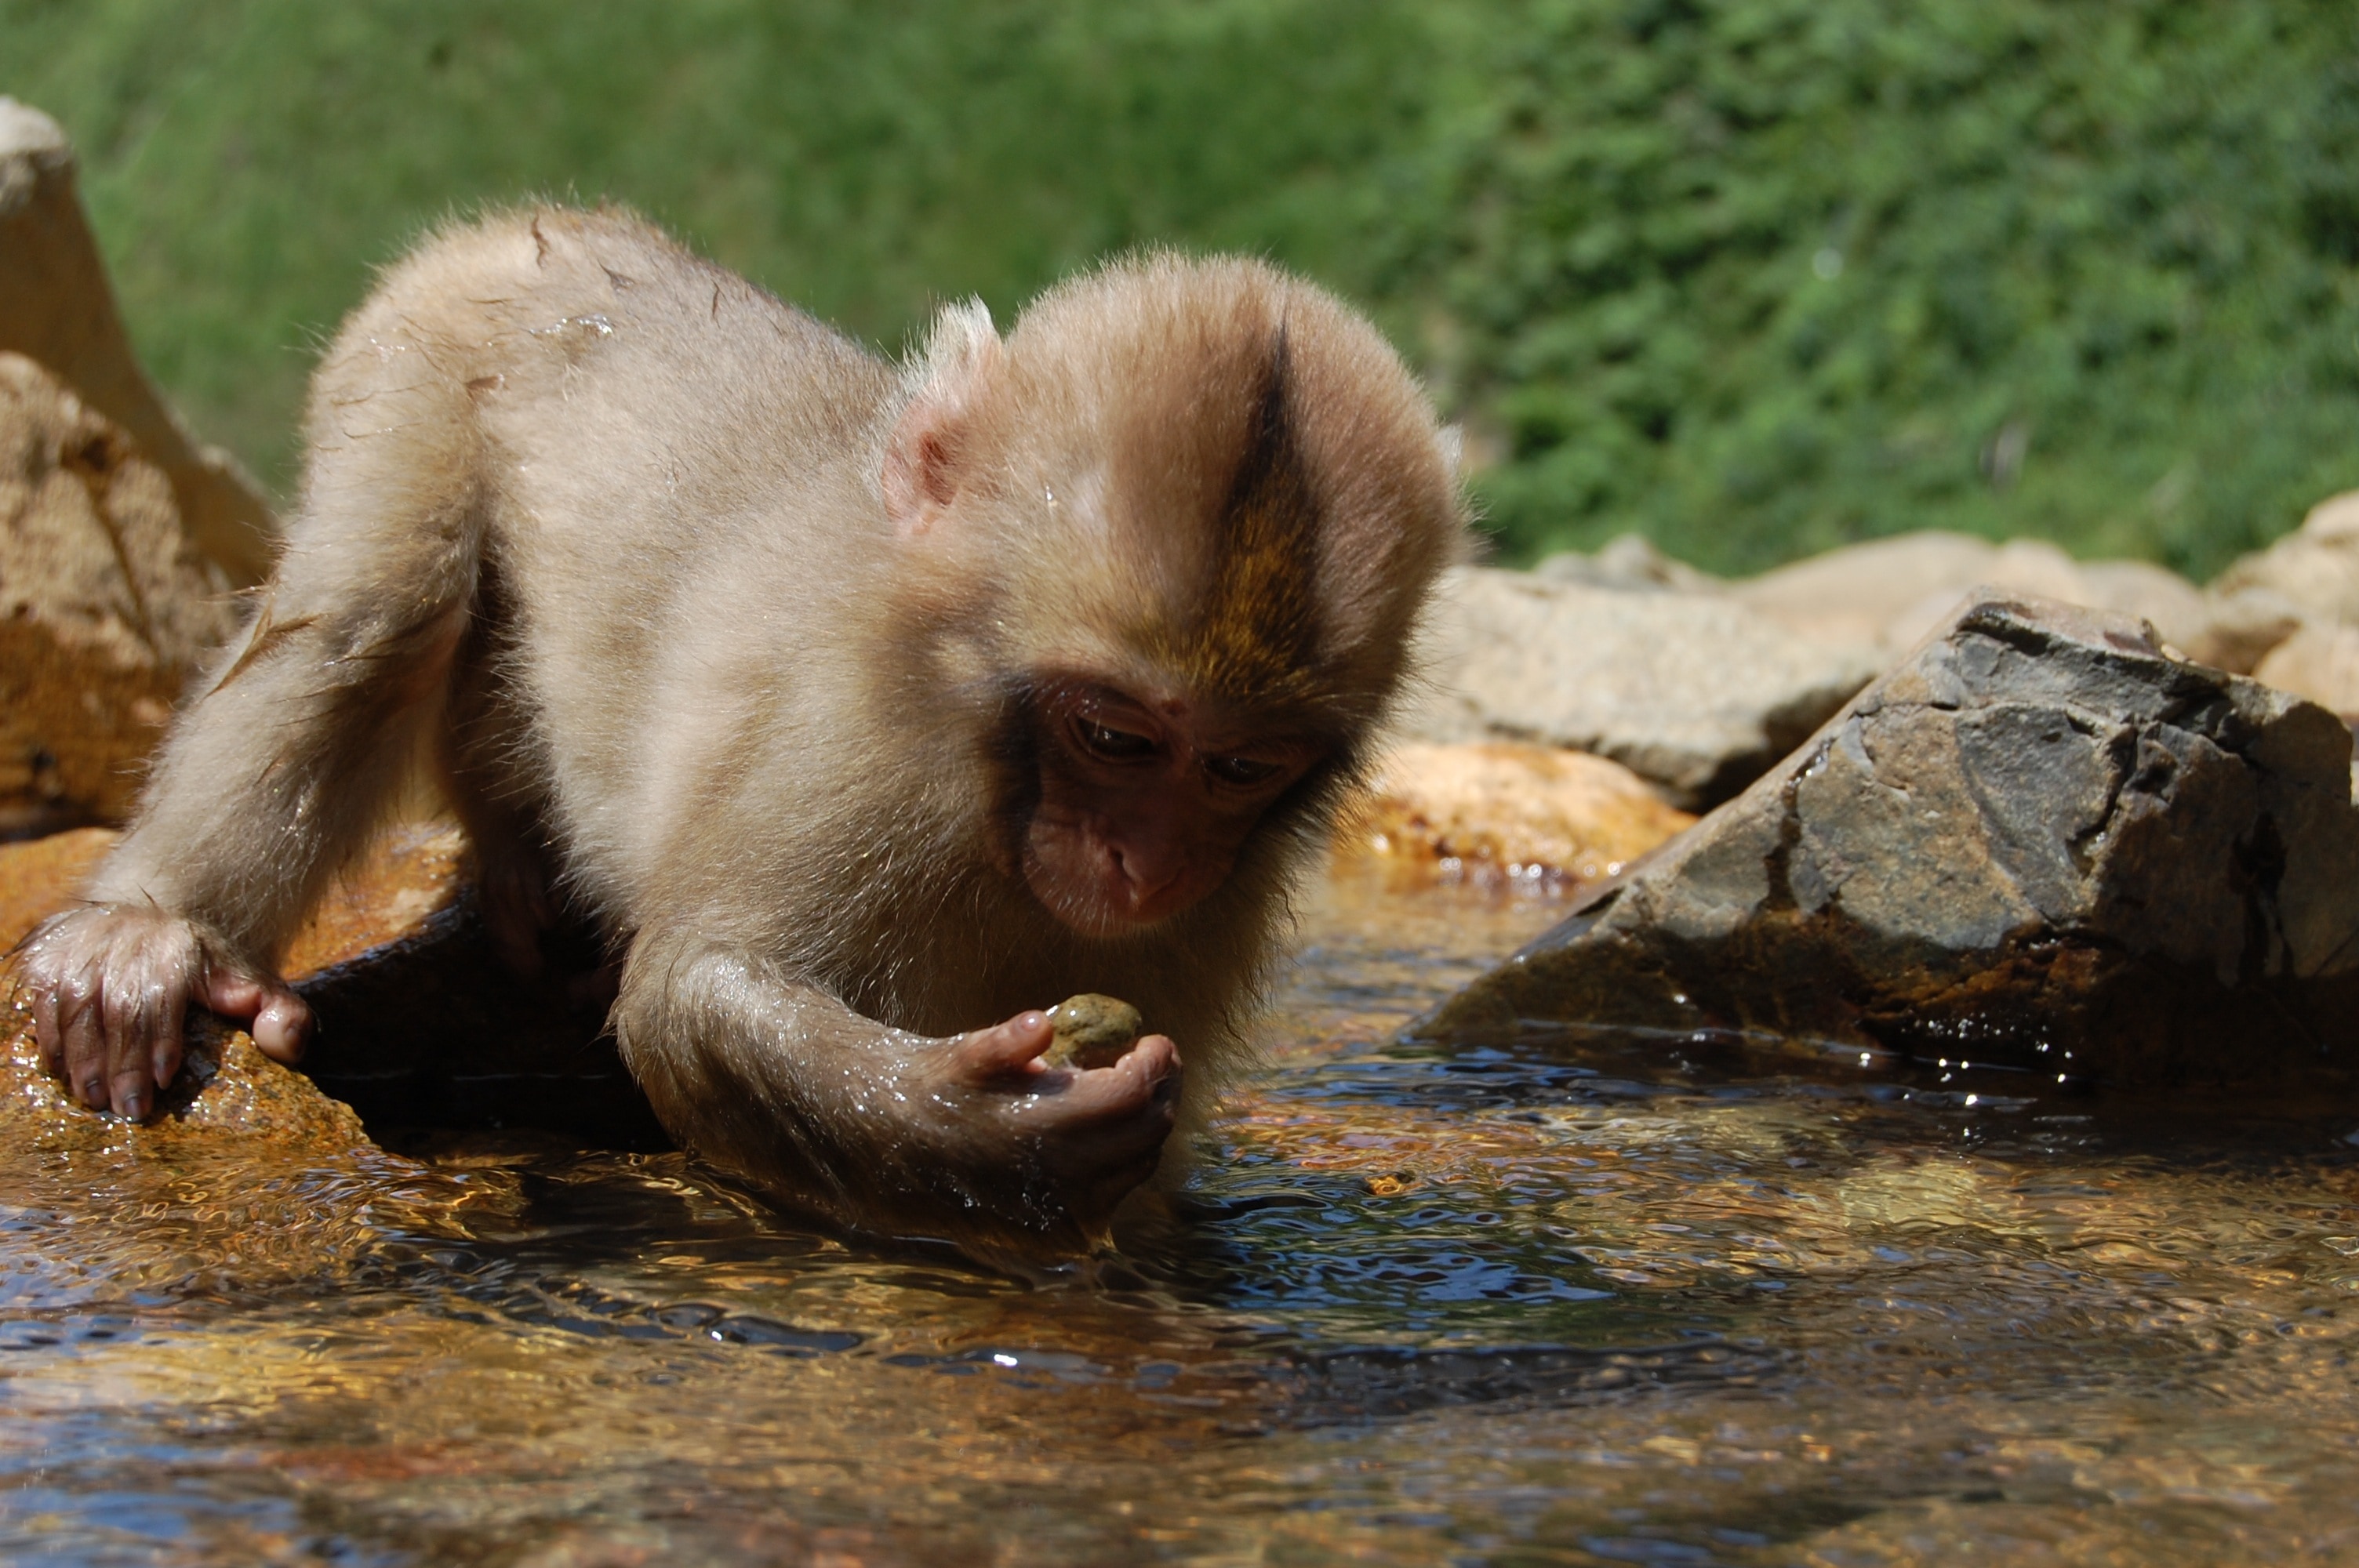 brown monkey hands on water during daytime